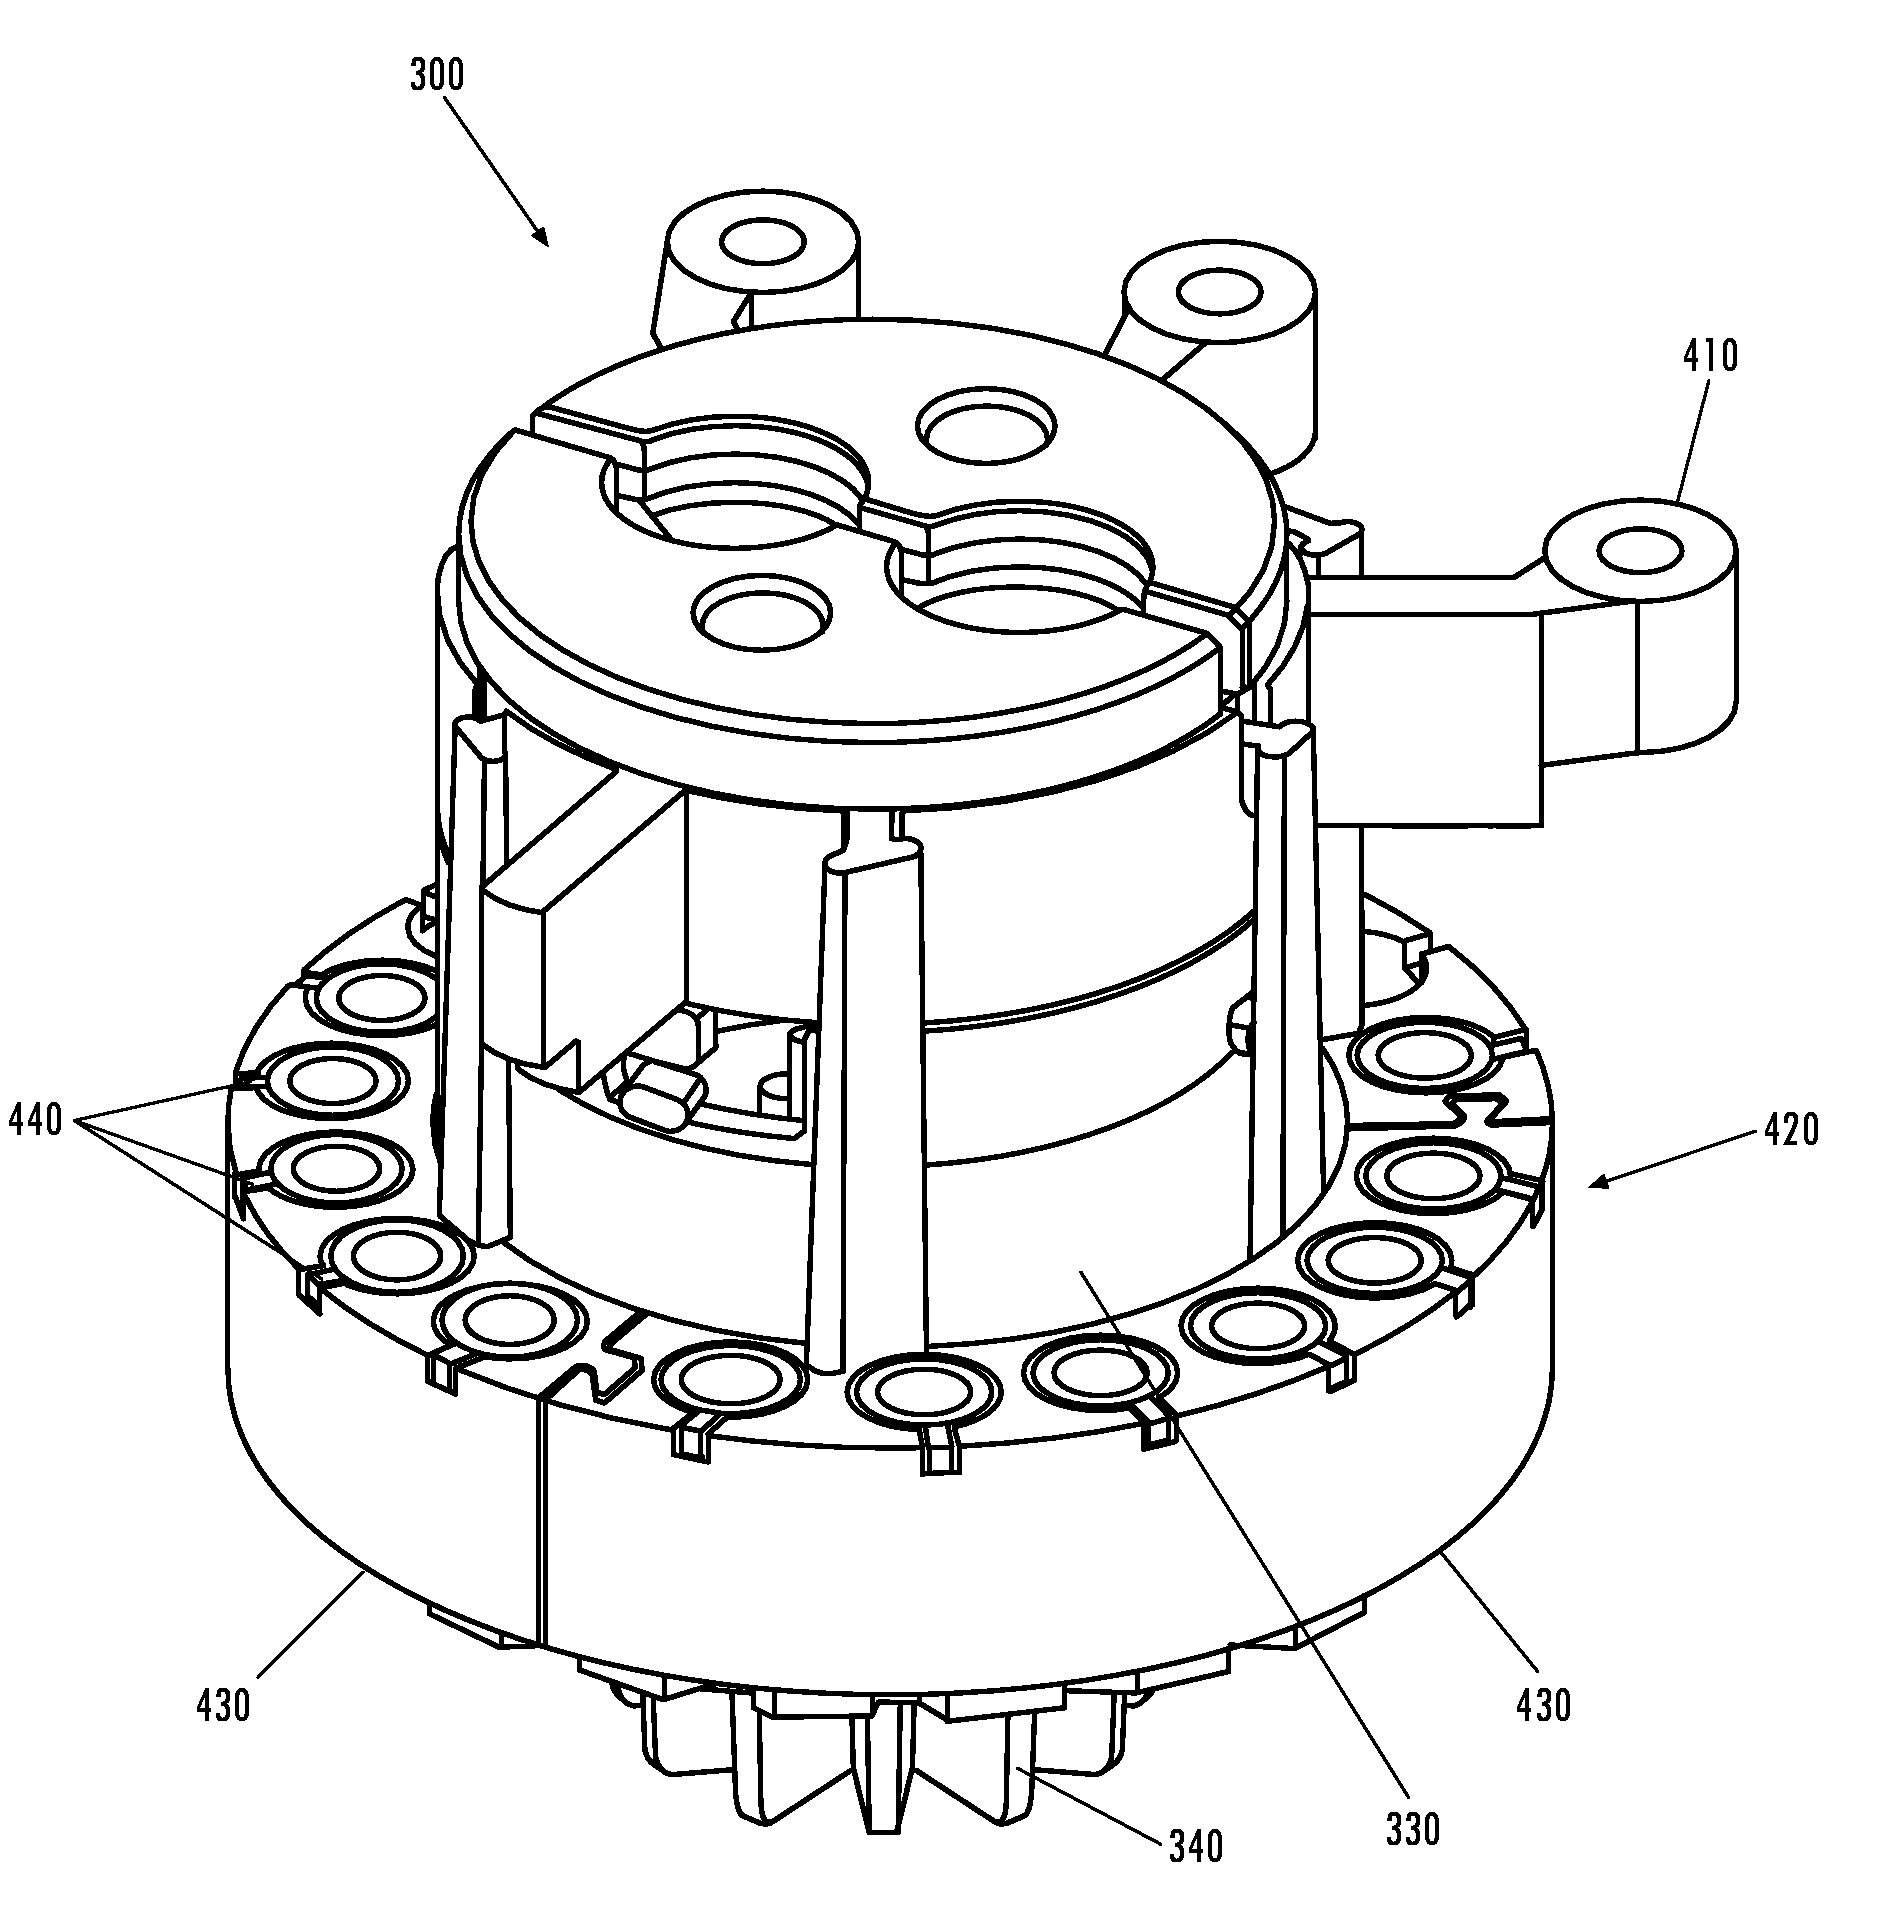 Dispensing nozzle assembly